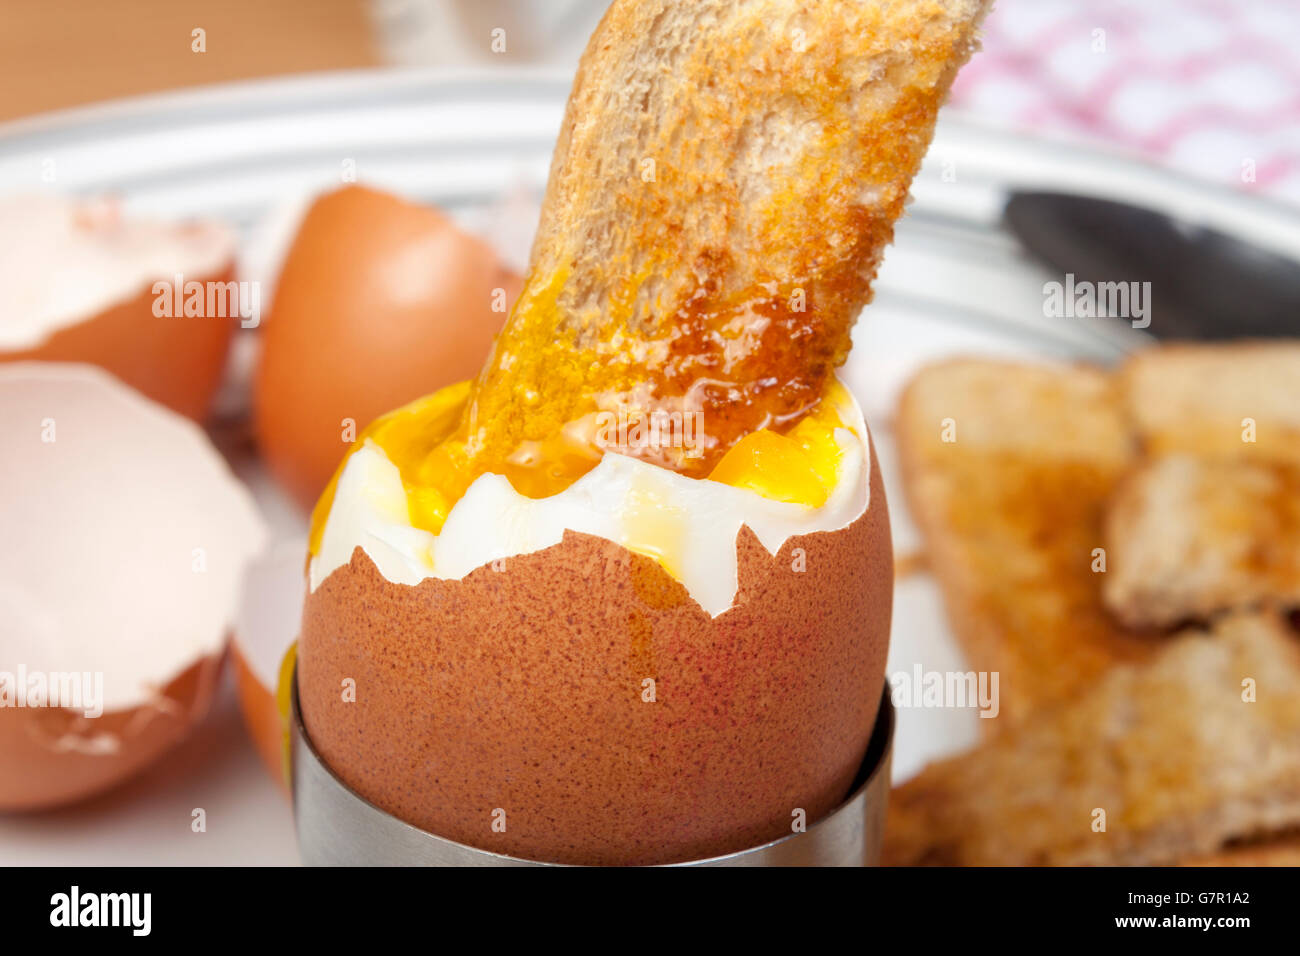 Close up shot of a golden toasted bread soldier dipped in a runny egg on a plate Stock Photo